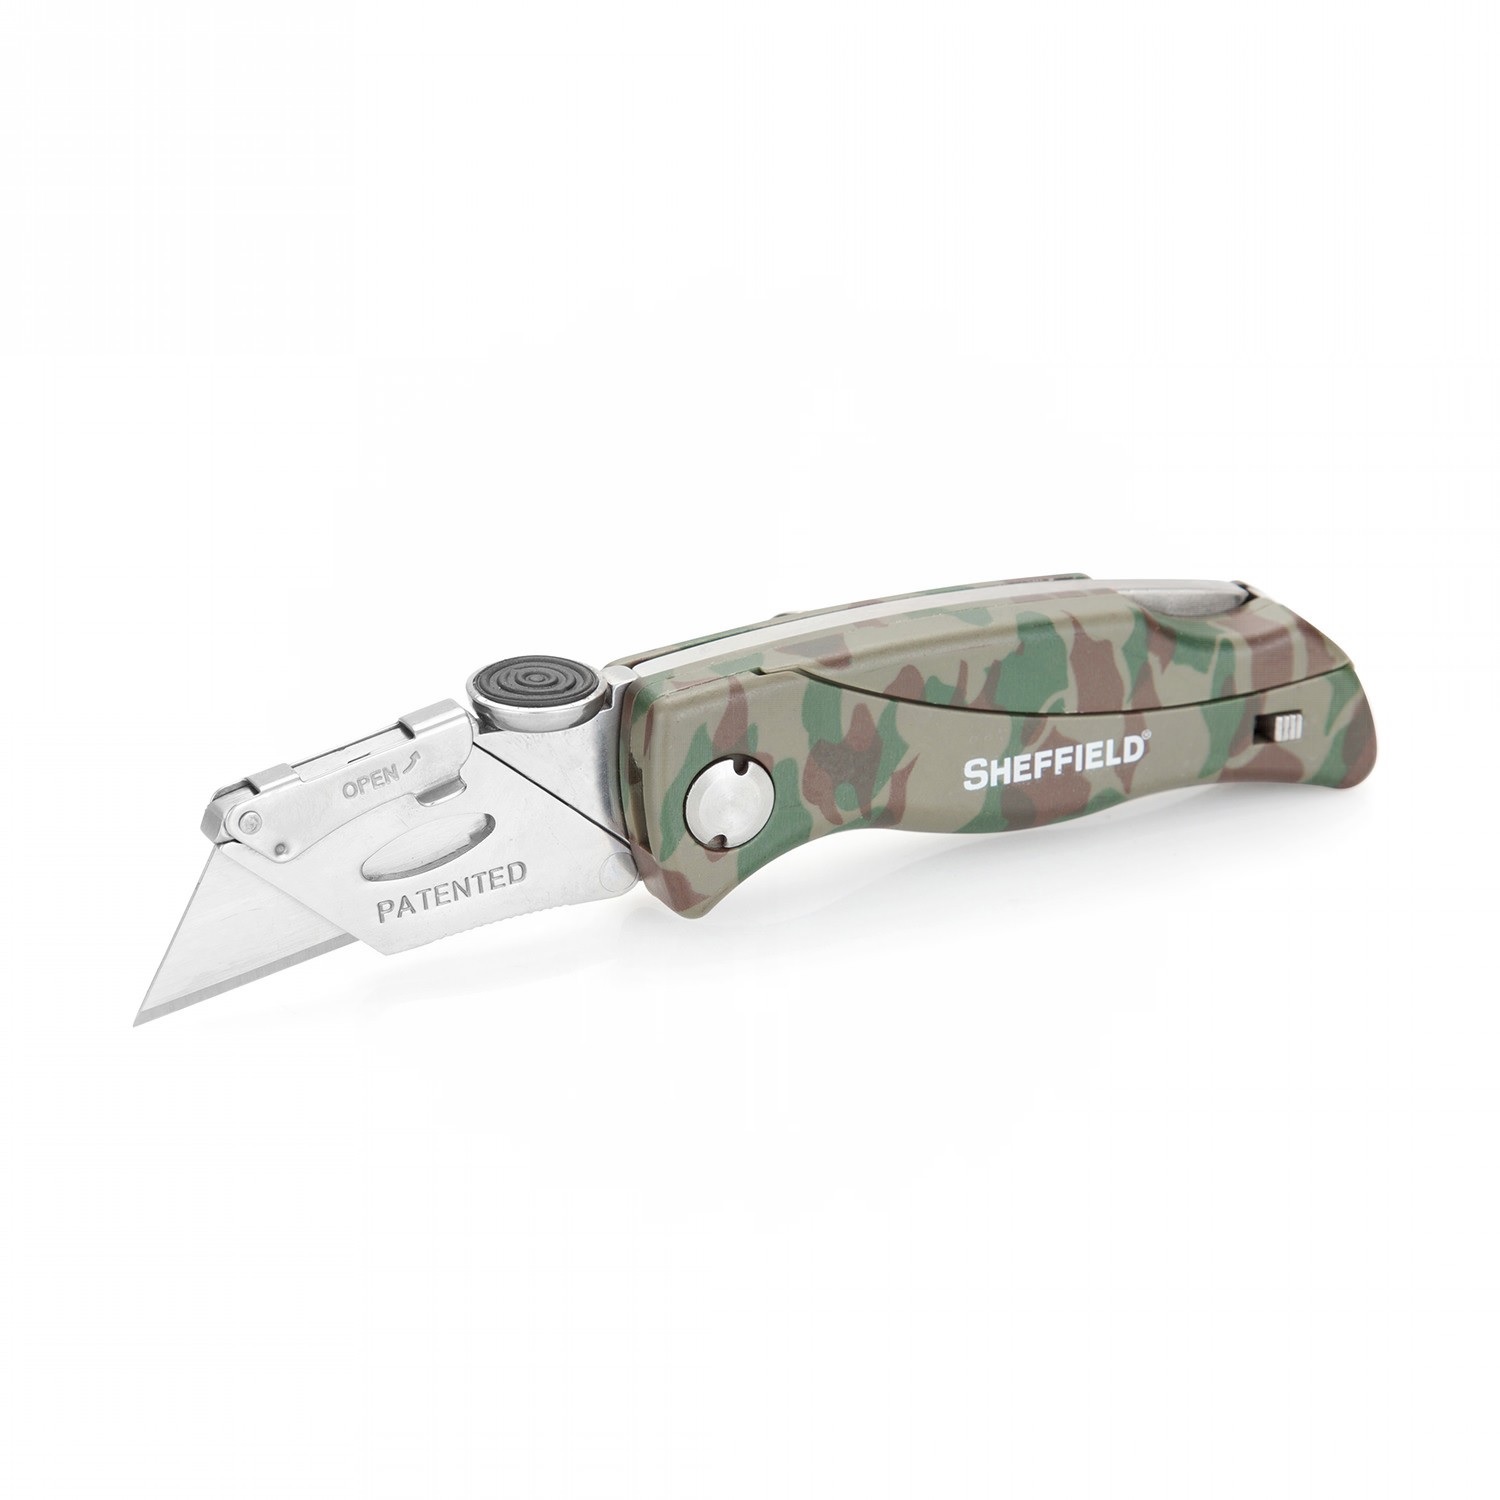 Sheffield Quick Change Utility Folder 2.5 in Blade Camo ABS - image 1 of 5